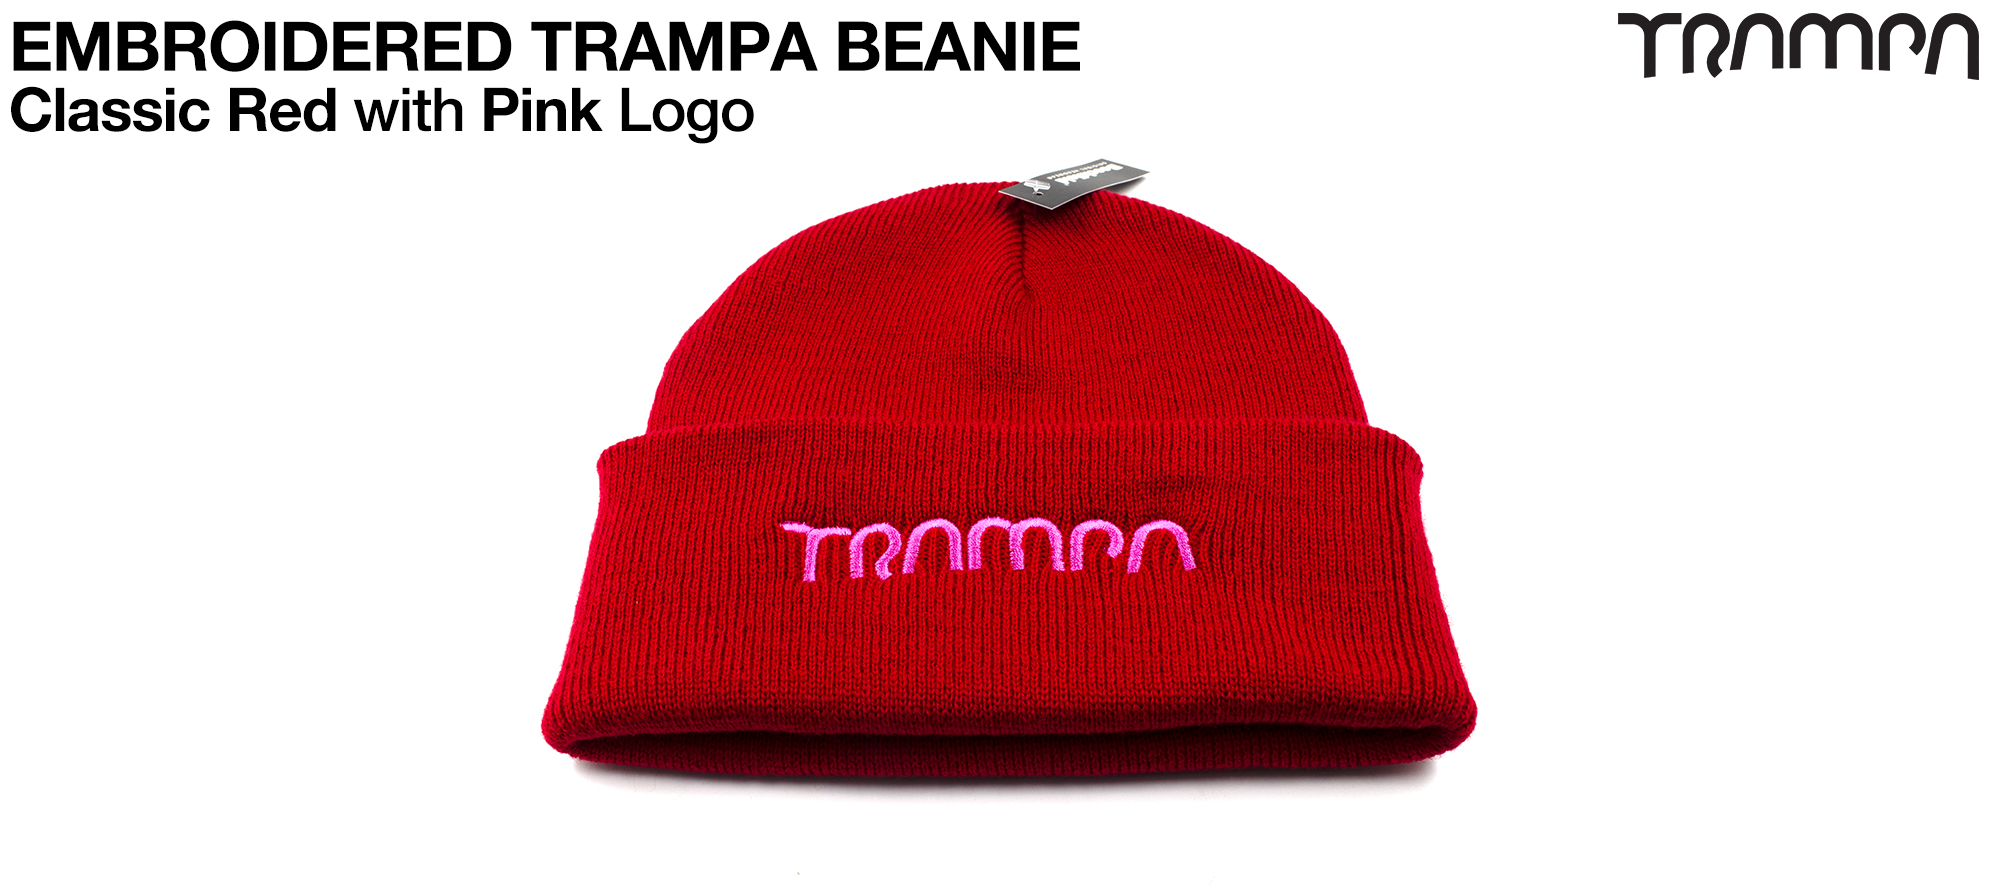 Classic RED Woolly hat with SHOCKING PINK embroidered TRAMPA logo  - Double thick turn over for extra warmth 